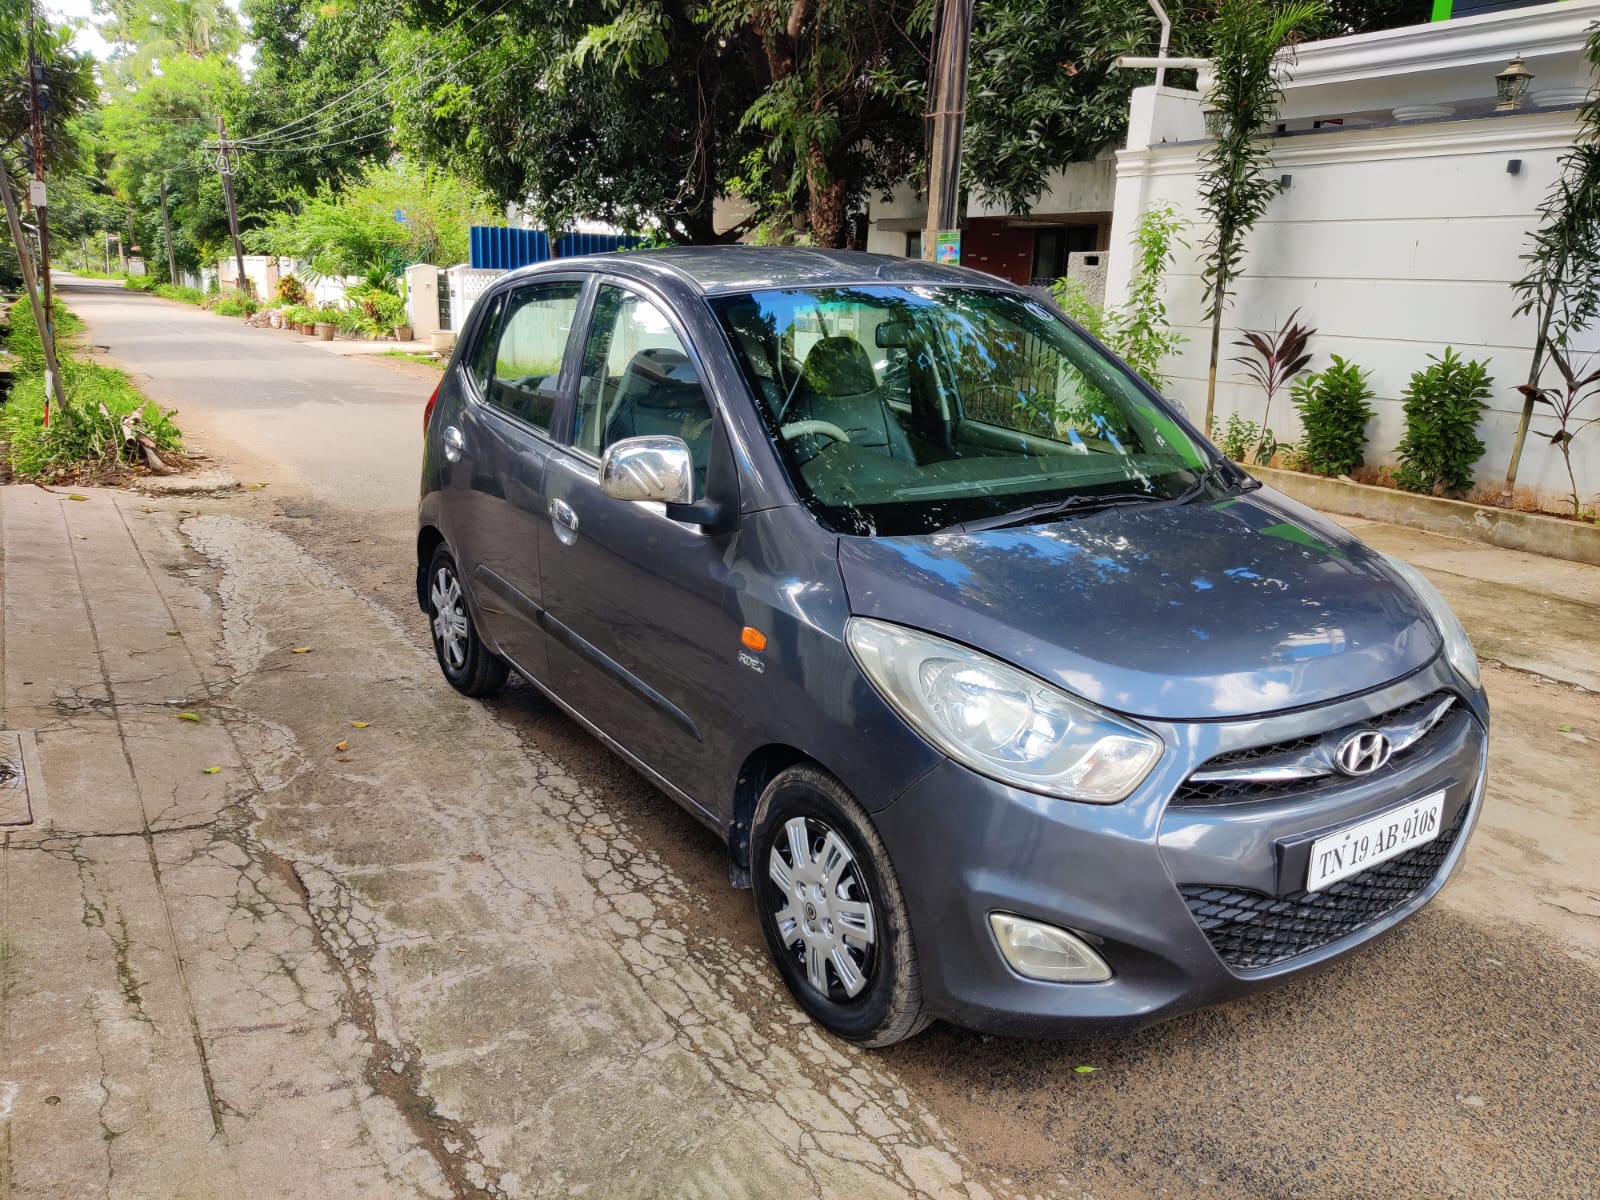 5147-for-sale-Hyundai-i10-Petrol-Second-Owner-2016-TN-registered-rs-310000